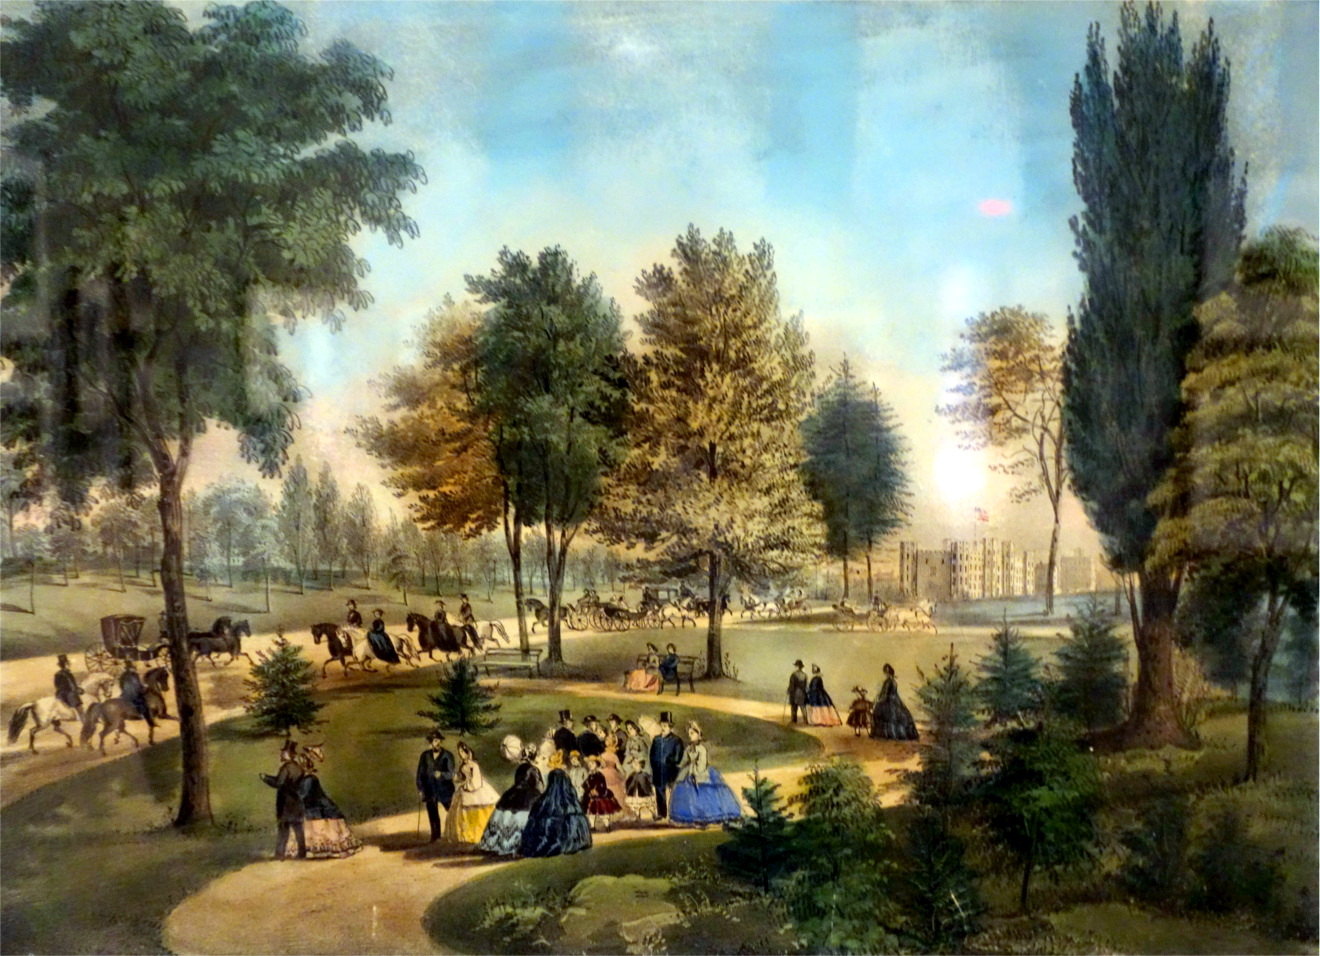 Central Park by Currier & Ives, 1862